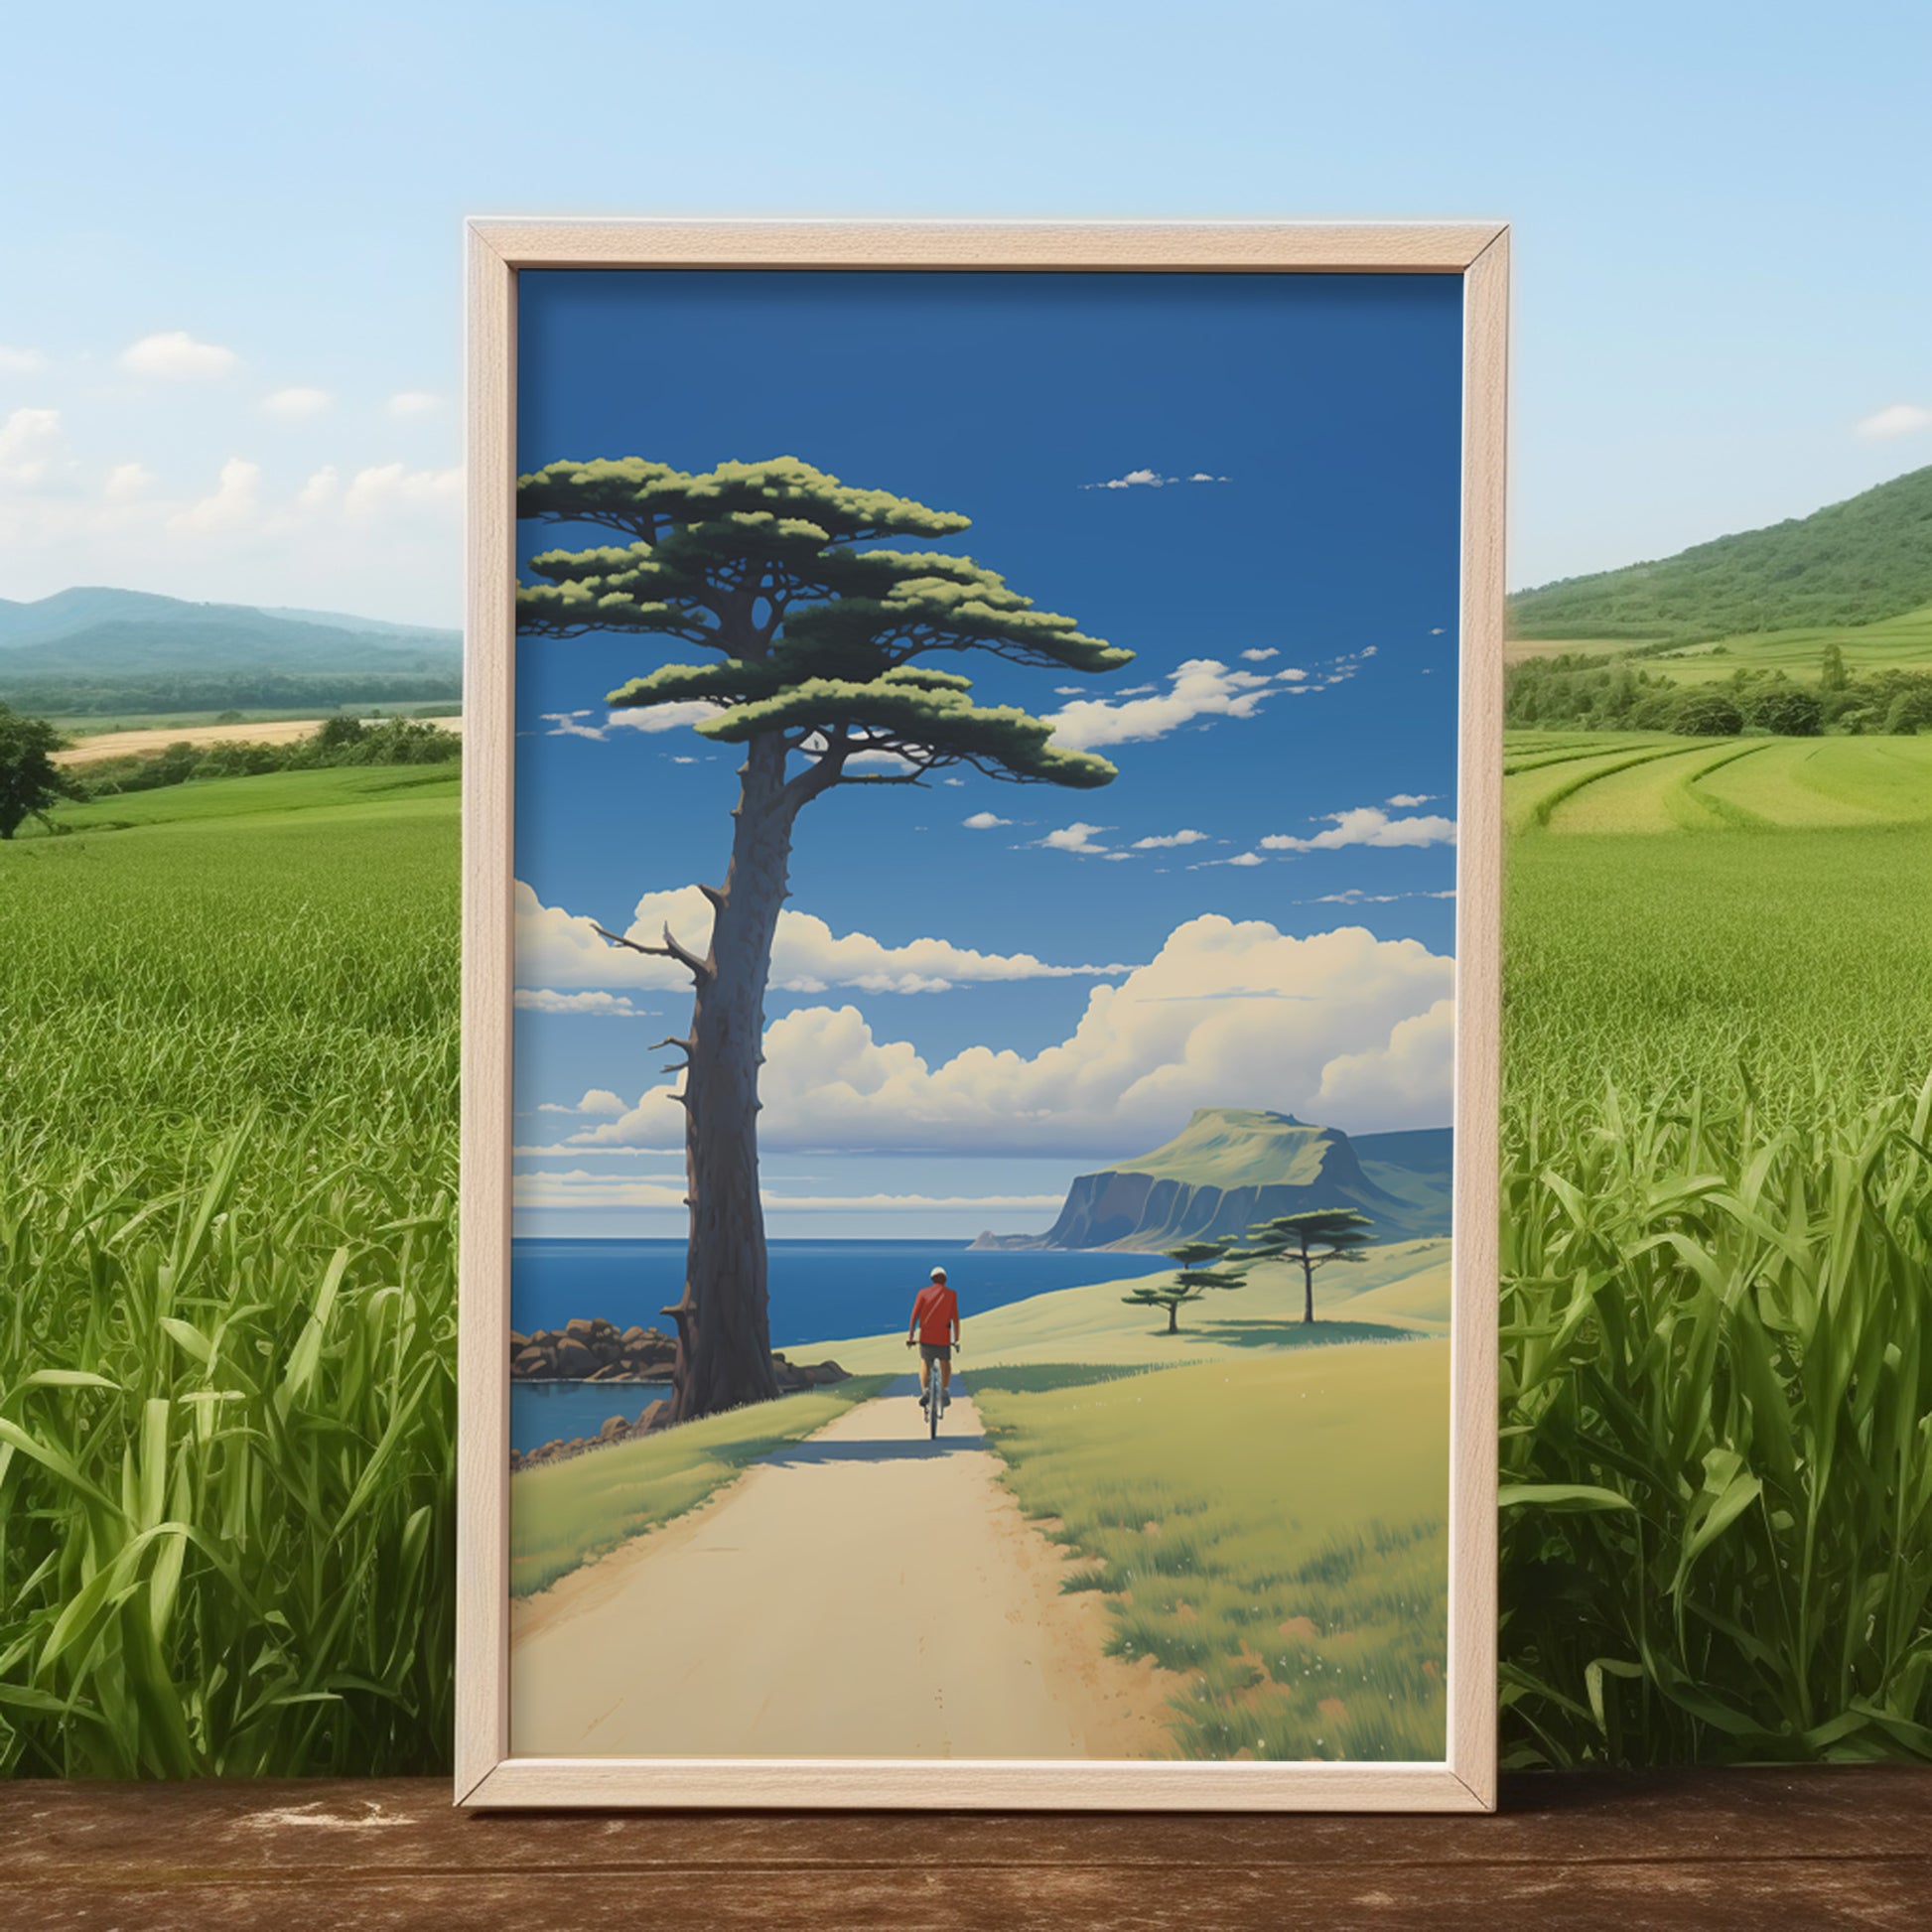 A painting of a person walking on a path toward the sea, framed and standing in a grassy field.